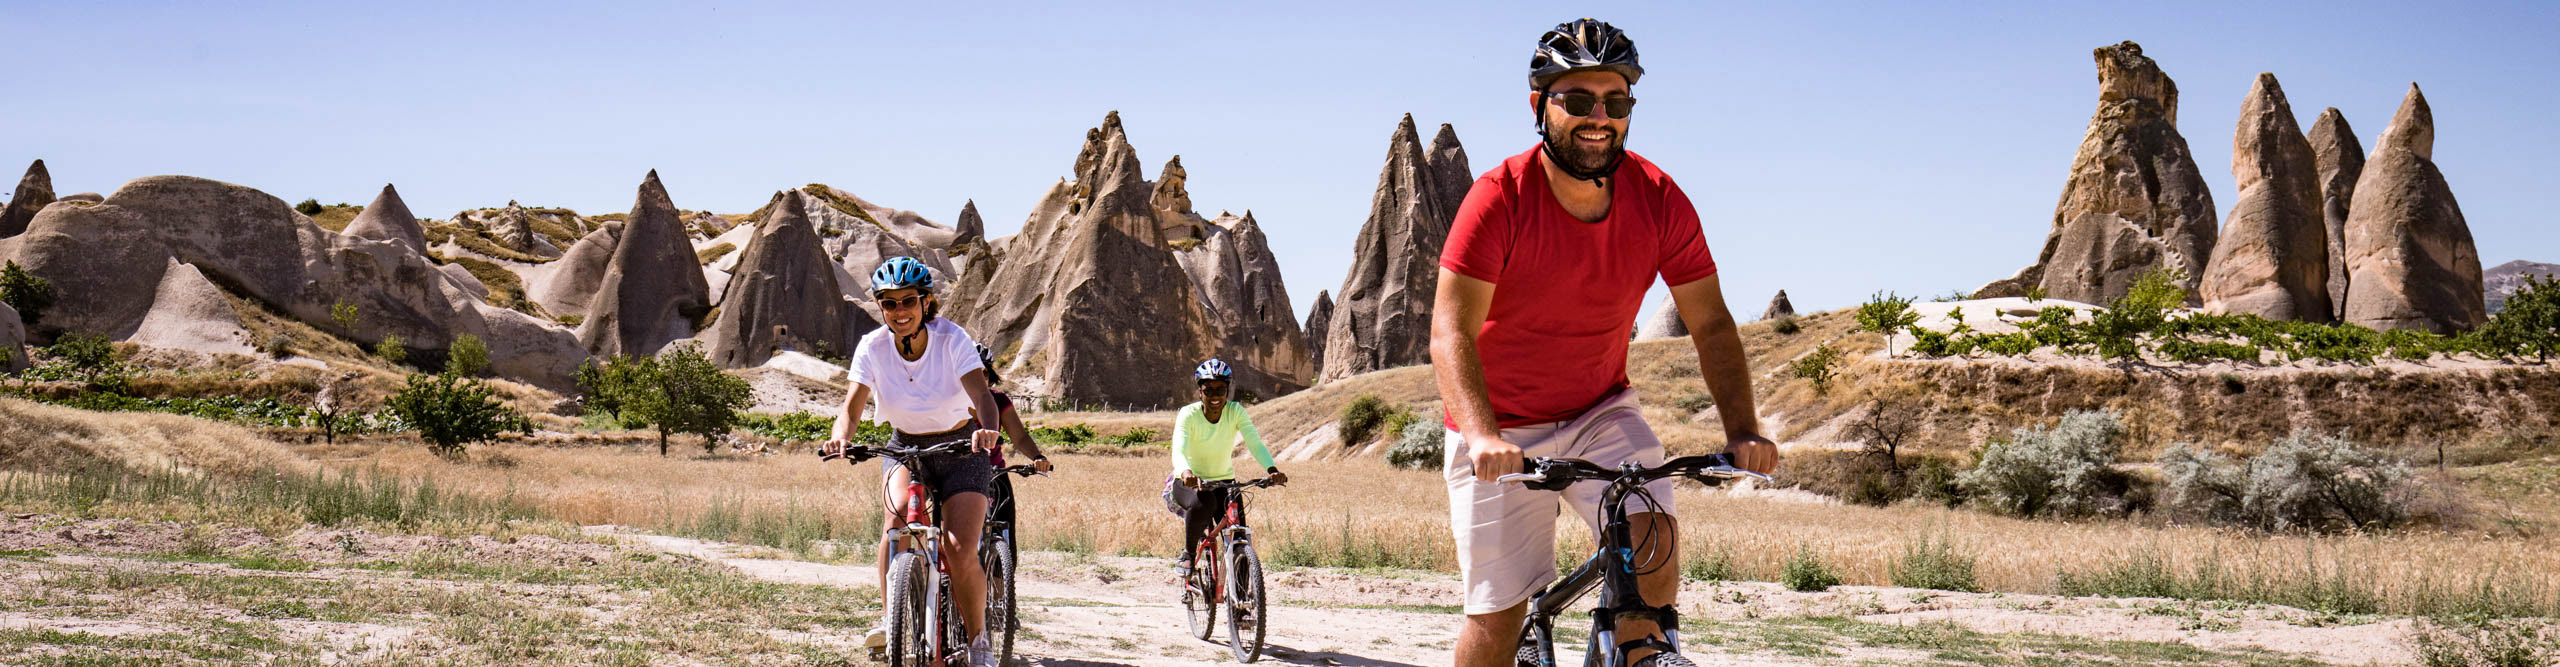 Tour guide riding with guests through the landscape in Cappadocia, on a sunny cloudless day 